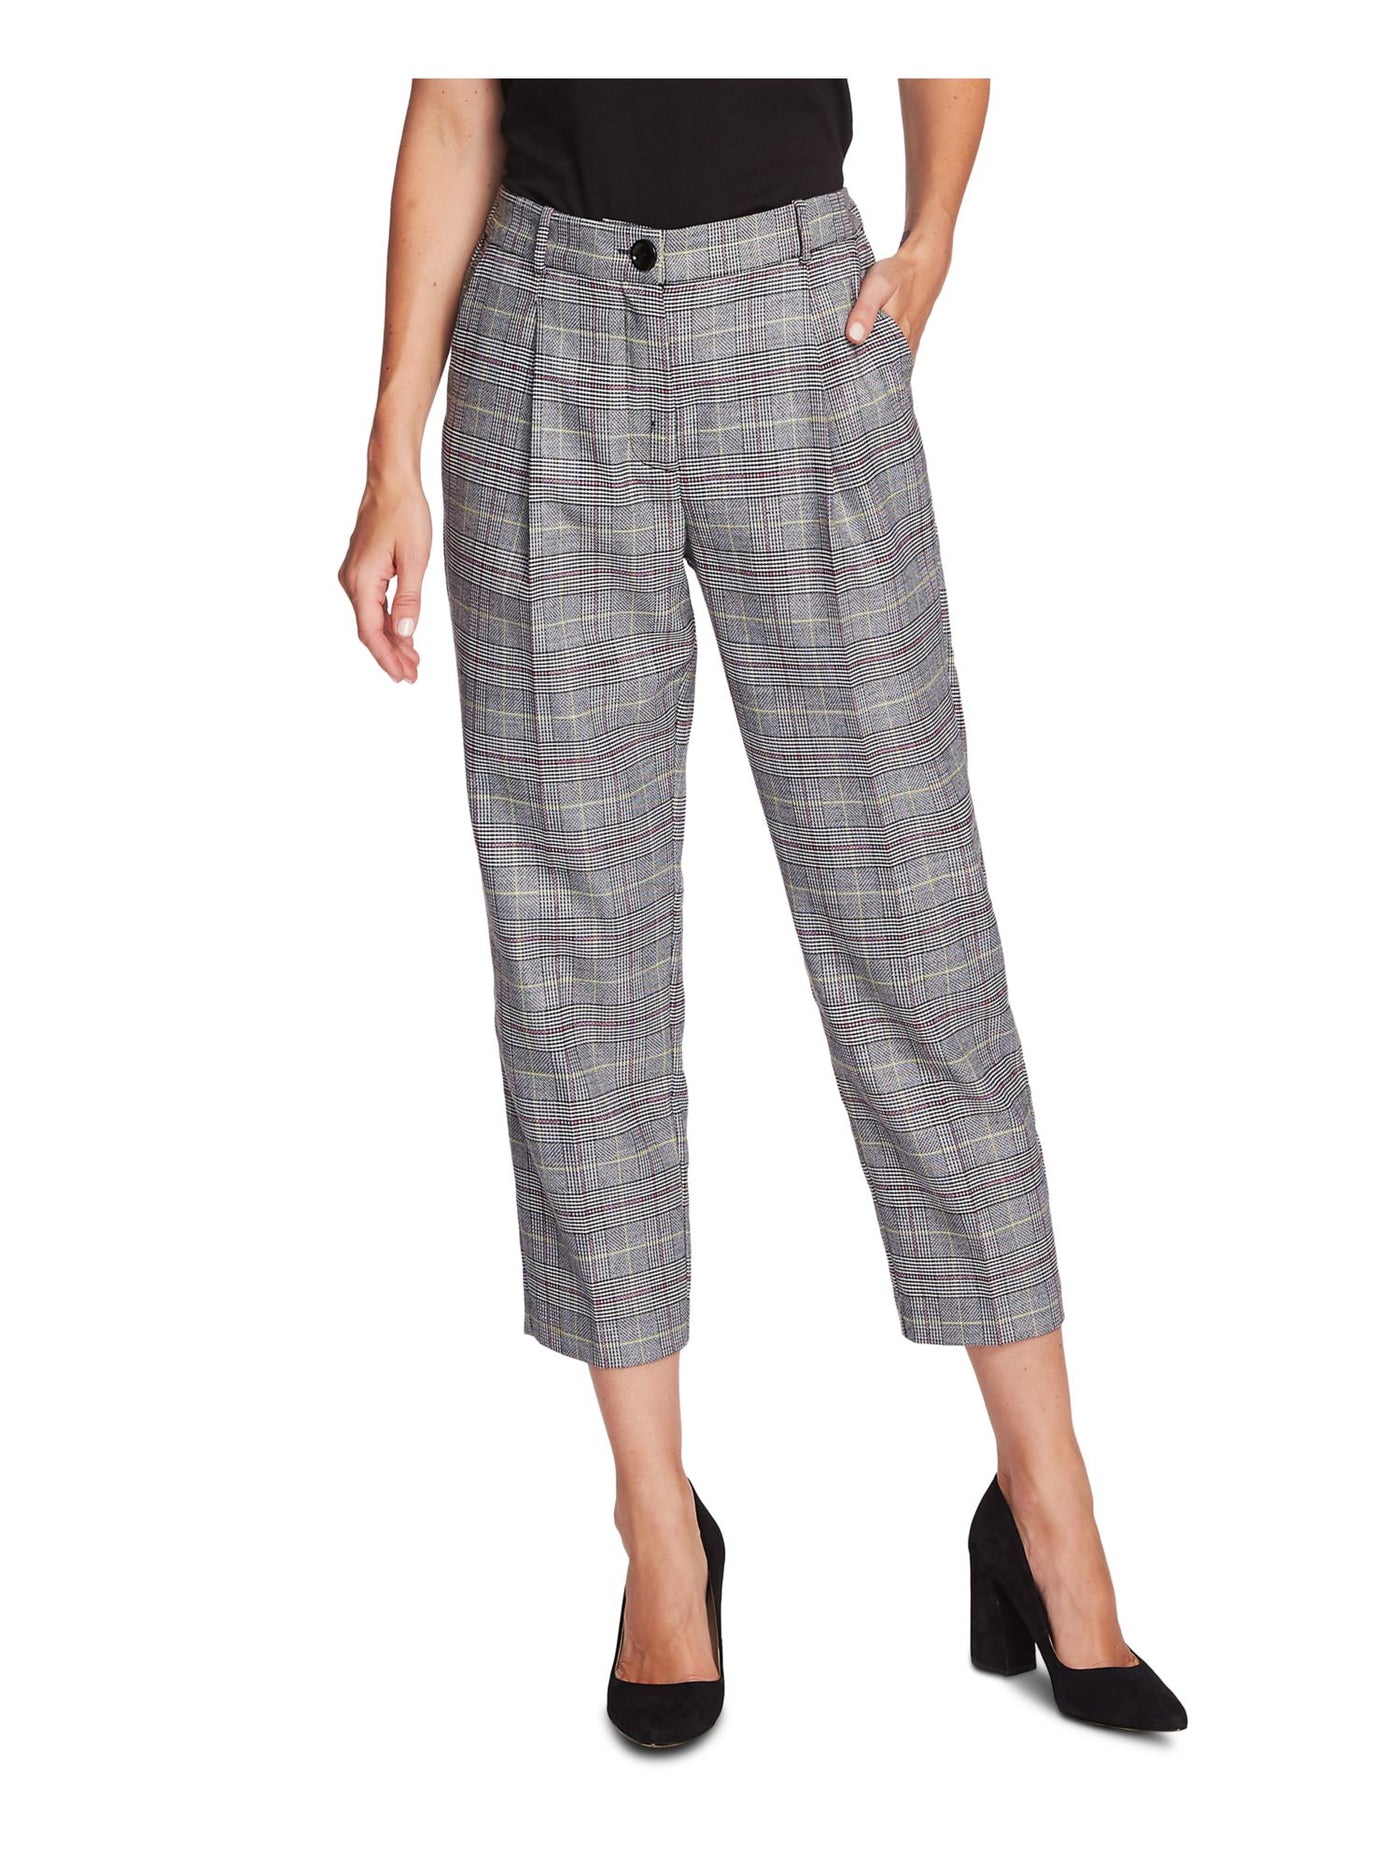 VINCE CAMUTO Womens Green Plaid Wear To Work Straight leg Pants 6